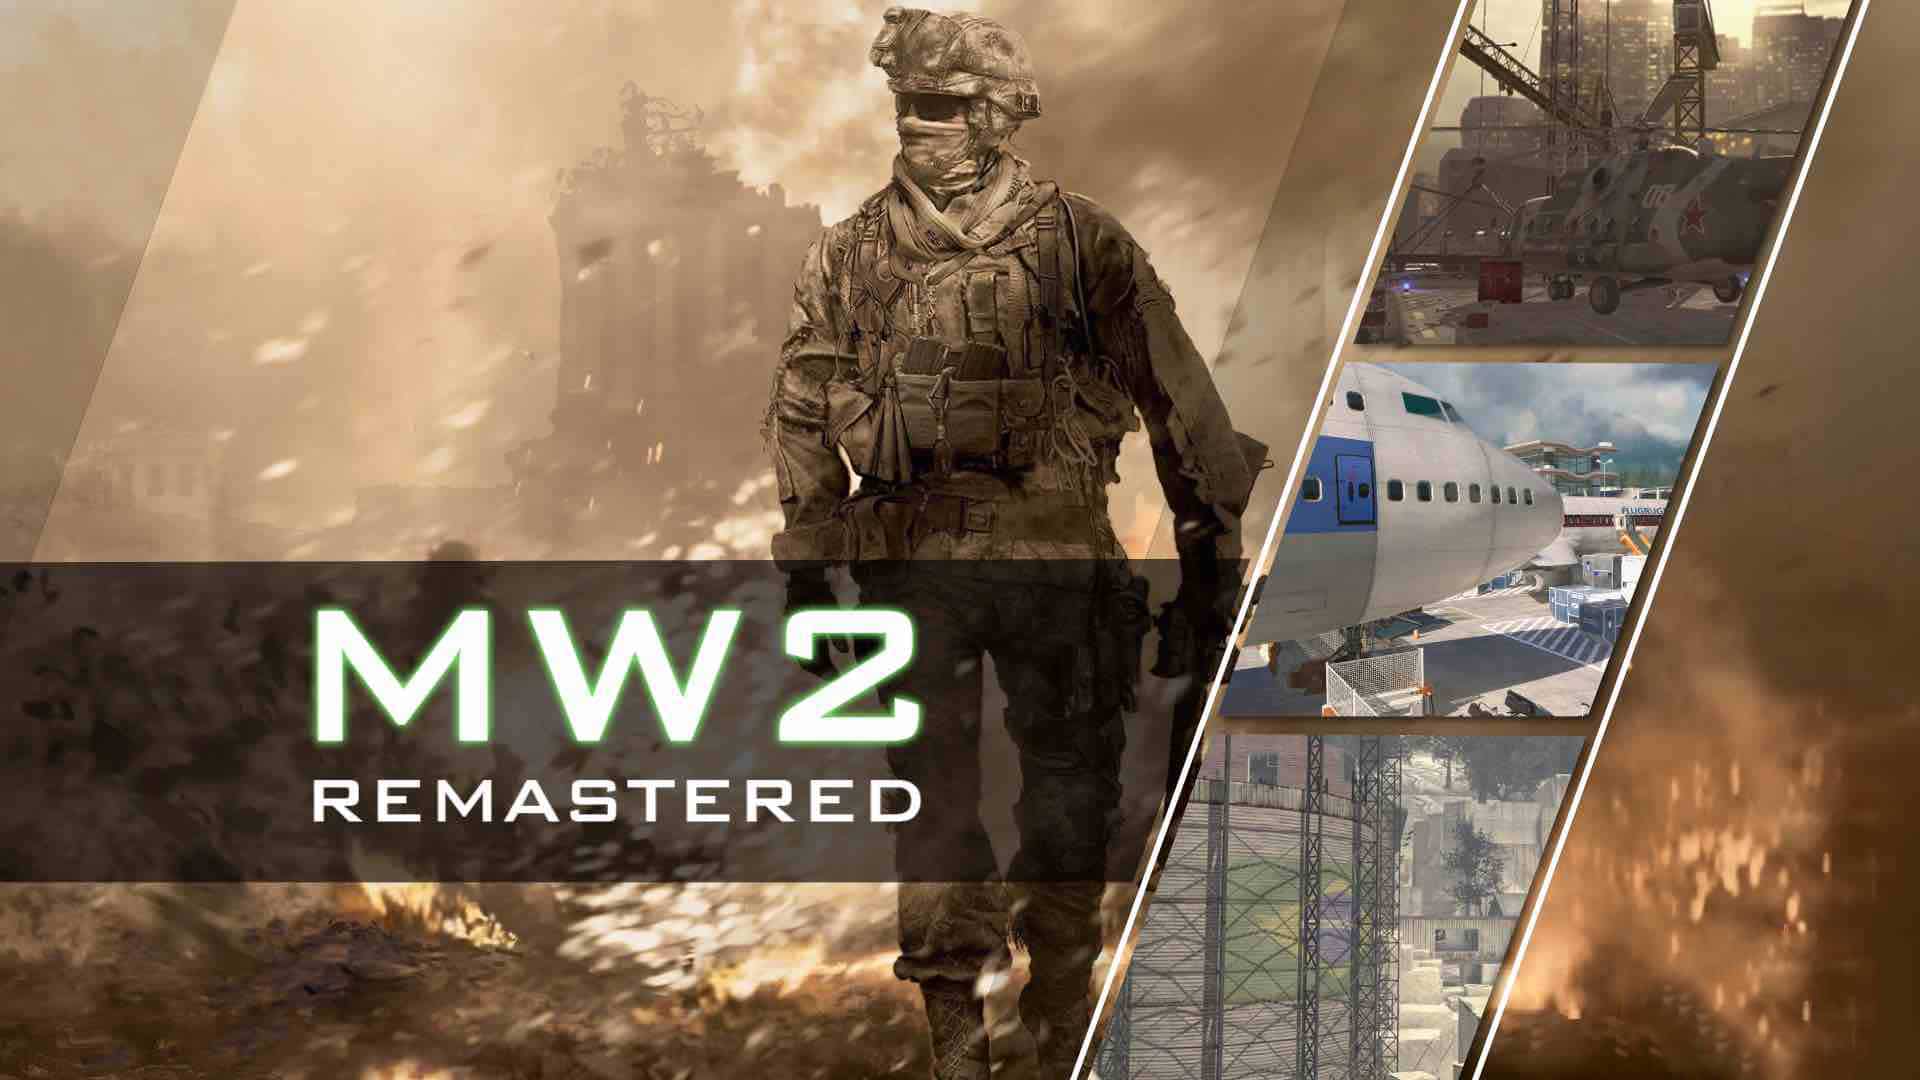 Remastered ‘Call Of Duty: Modern Warfare 2’ Confirmed By PEGI Rating